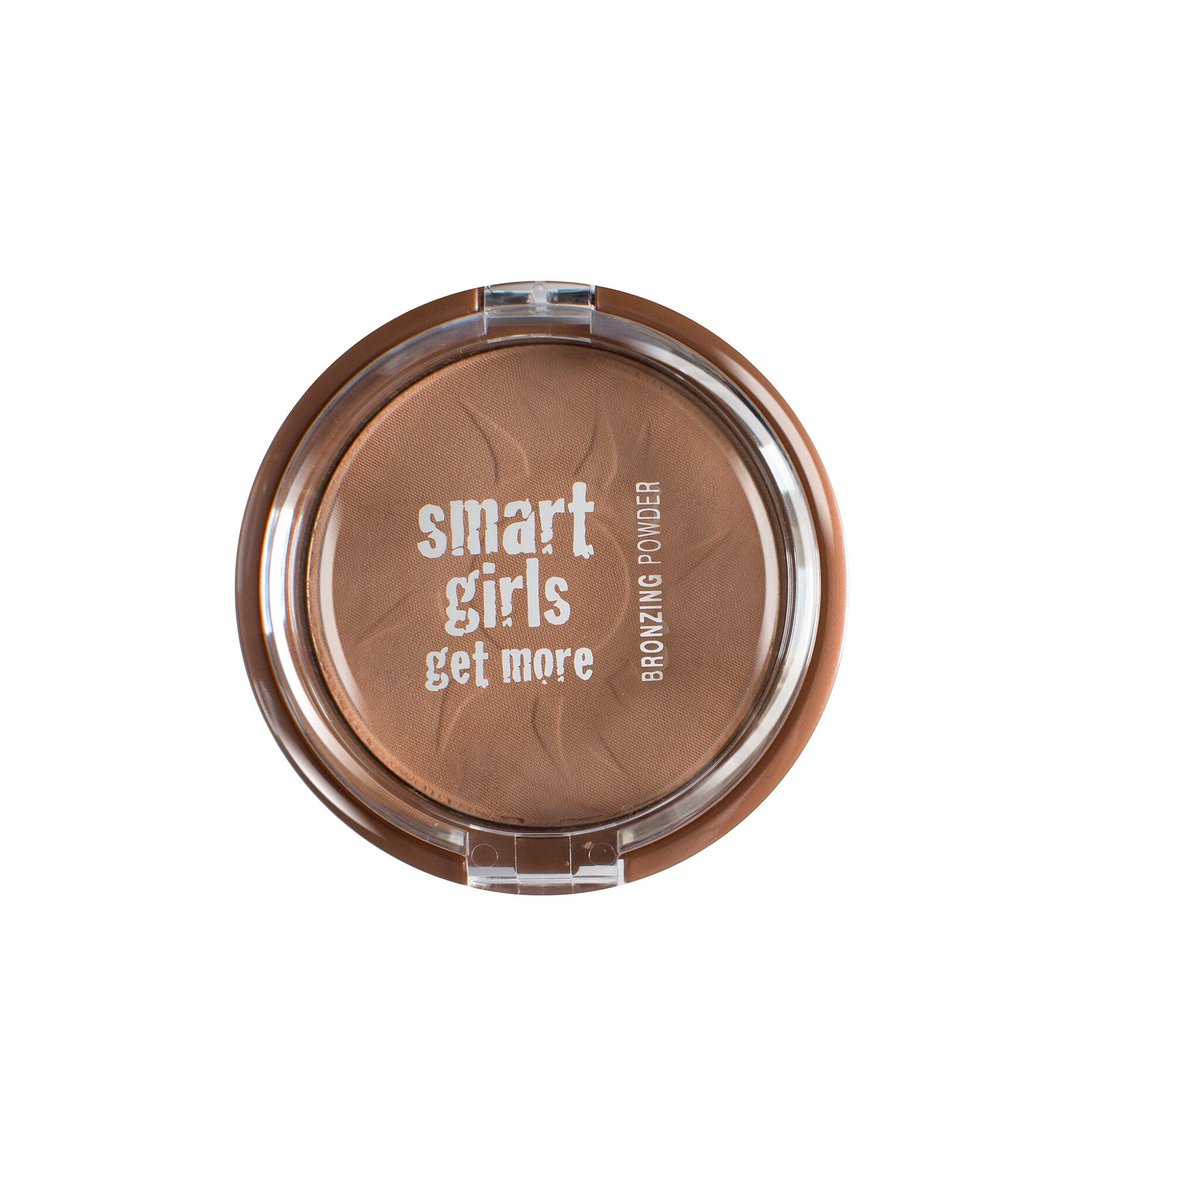 Smart Girls Get More Bronzing Powder With Pearl Finish 02 1pc